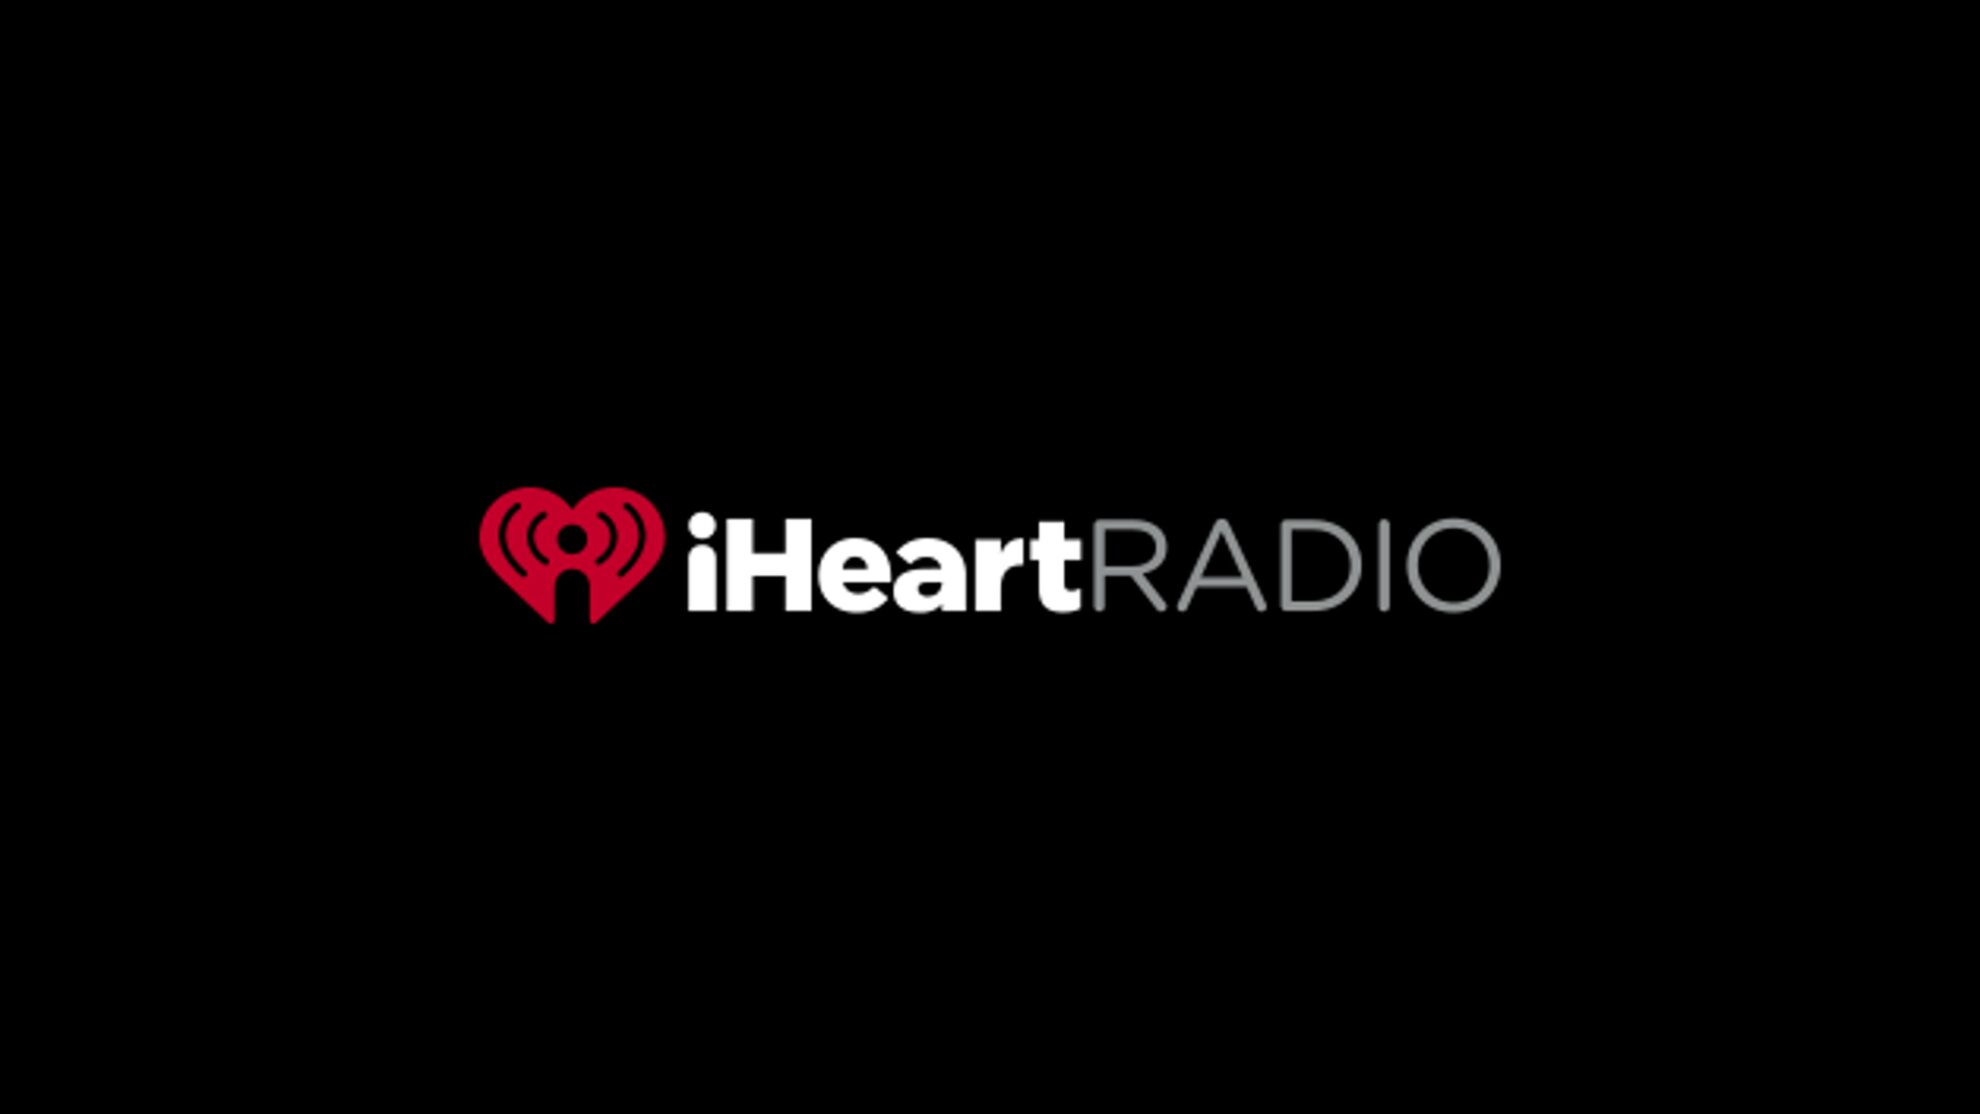 The iHeartRADIO logo with a black background